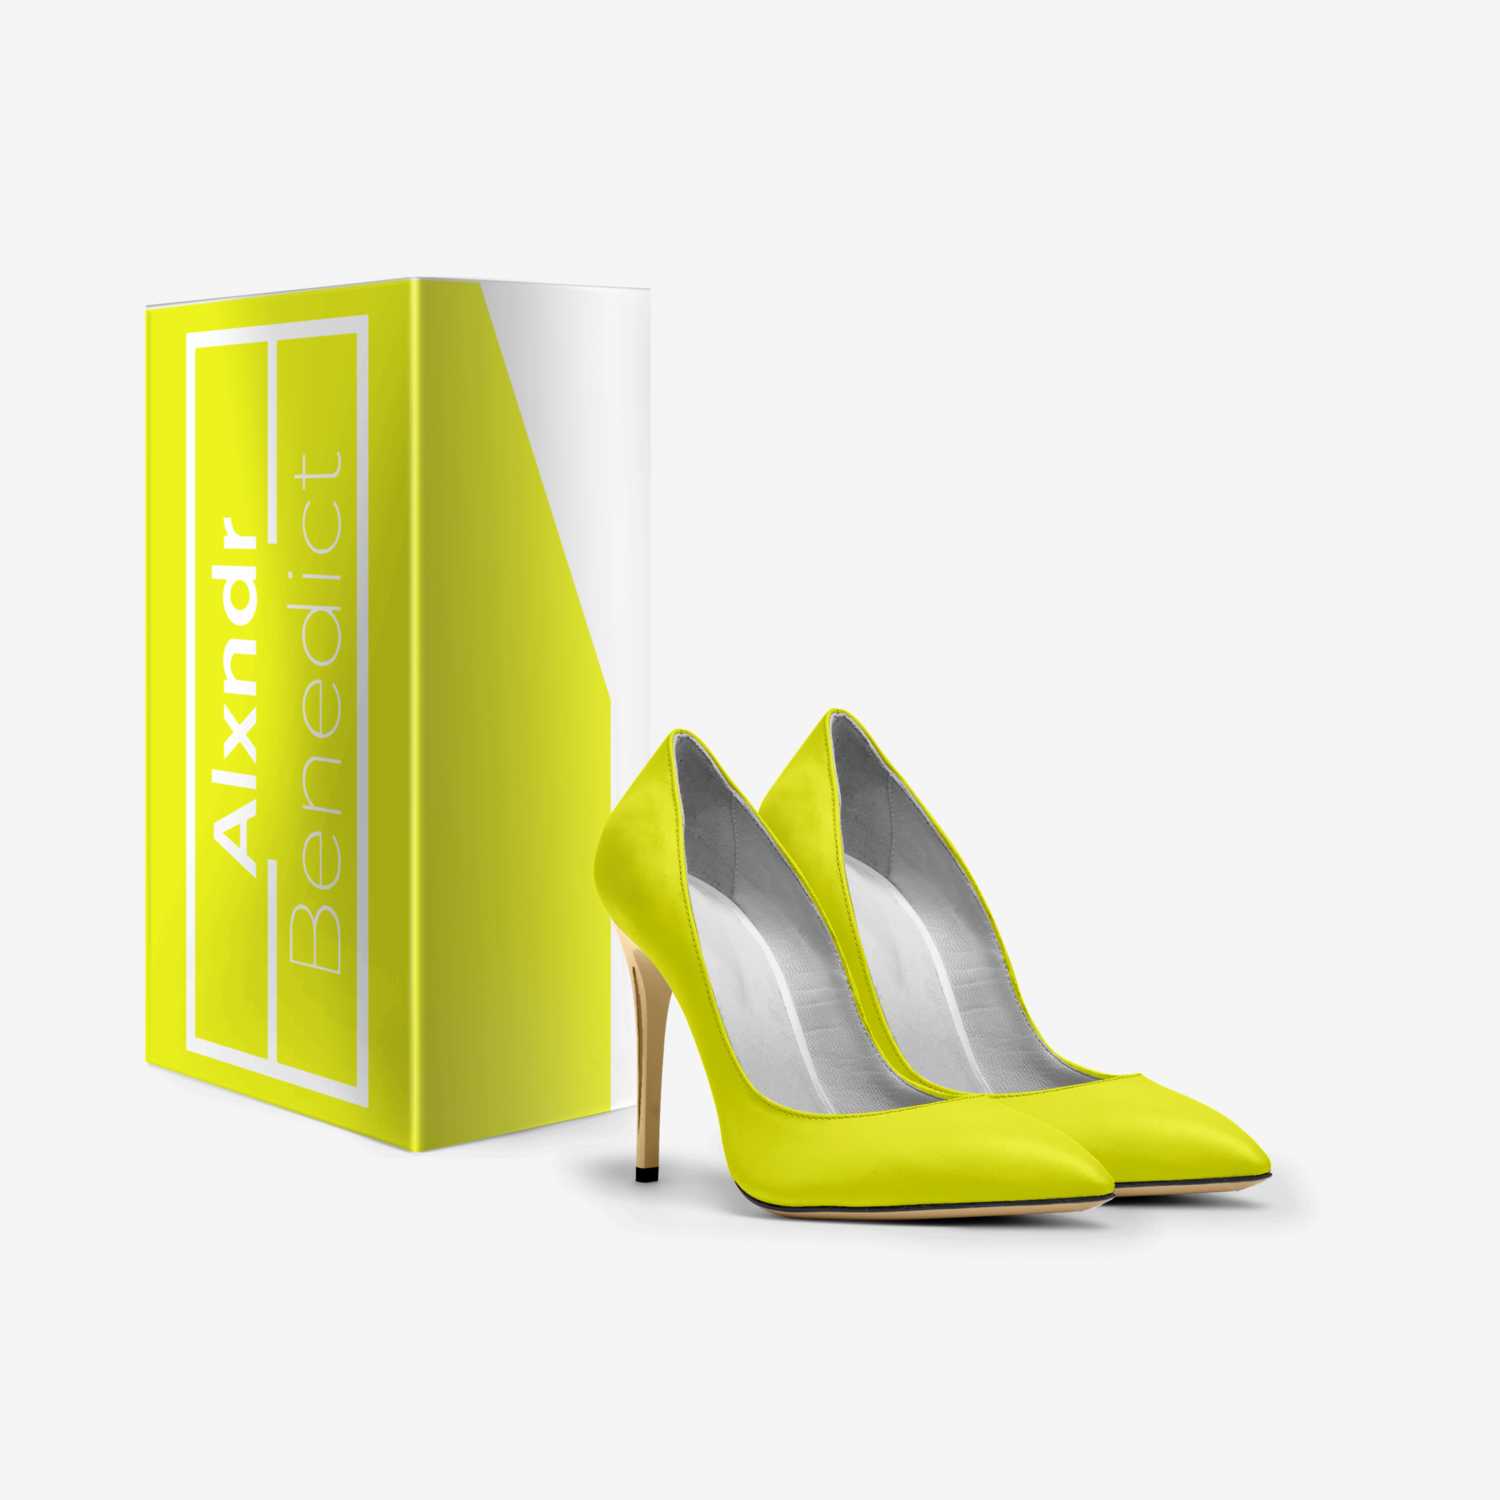 Lemon Cremé custom made in Italy shoes by Alexander Peters | Box view